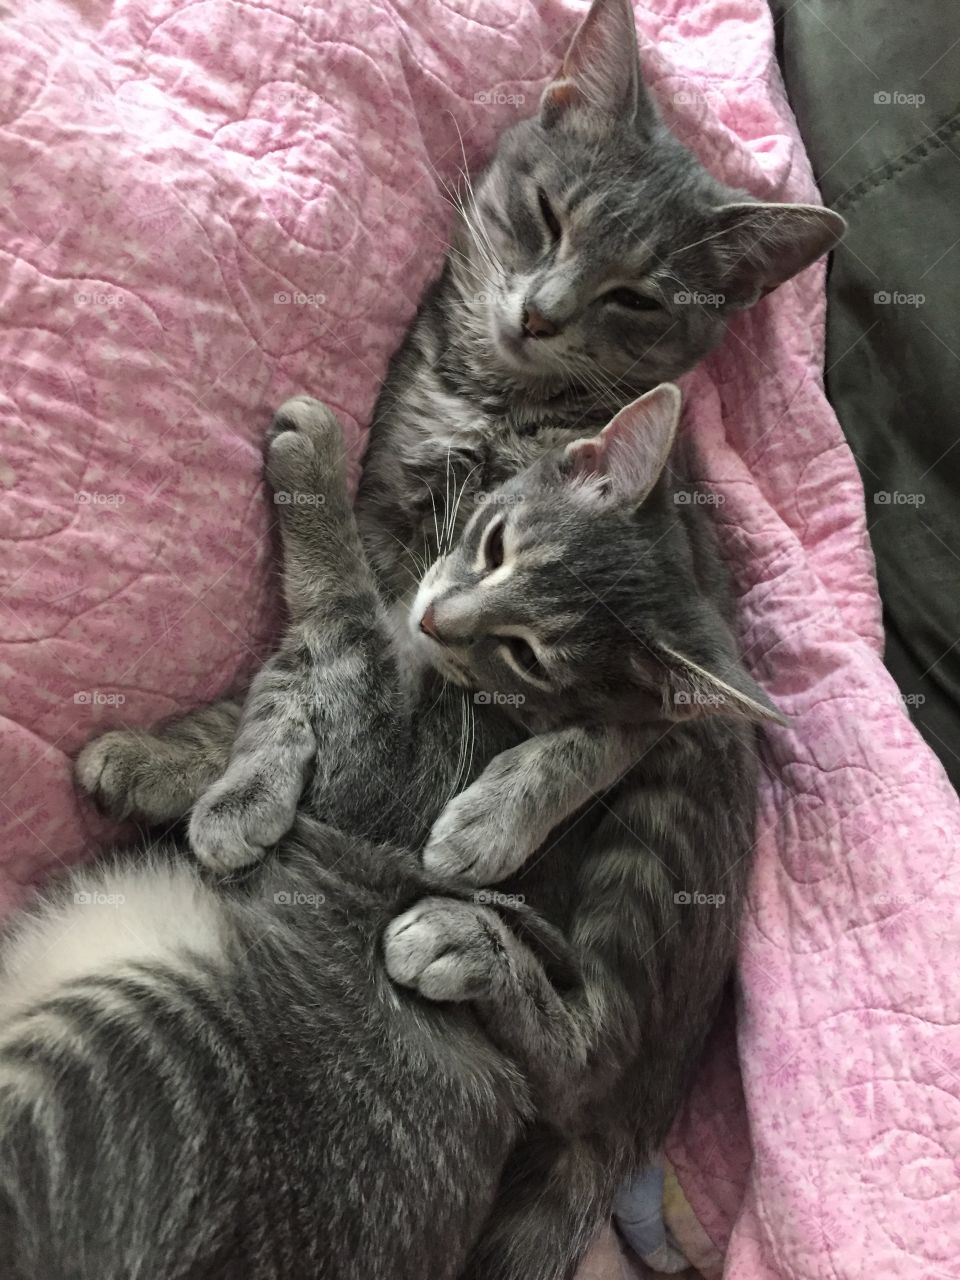 Mom and baby snuggle
